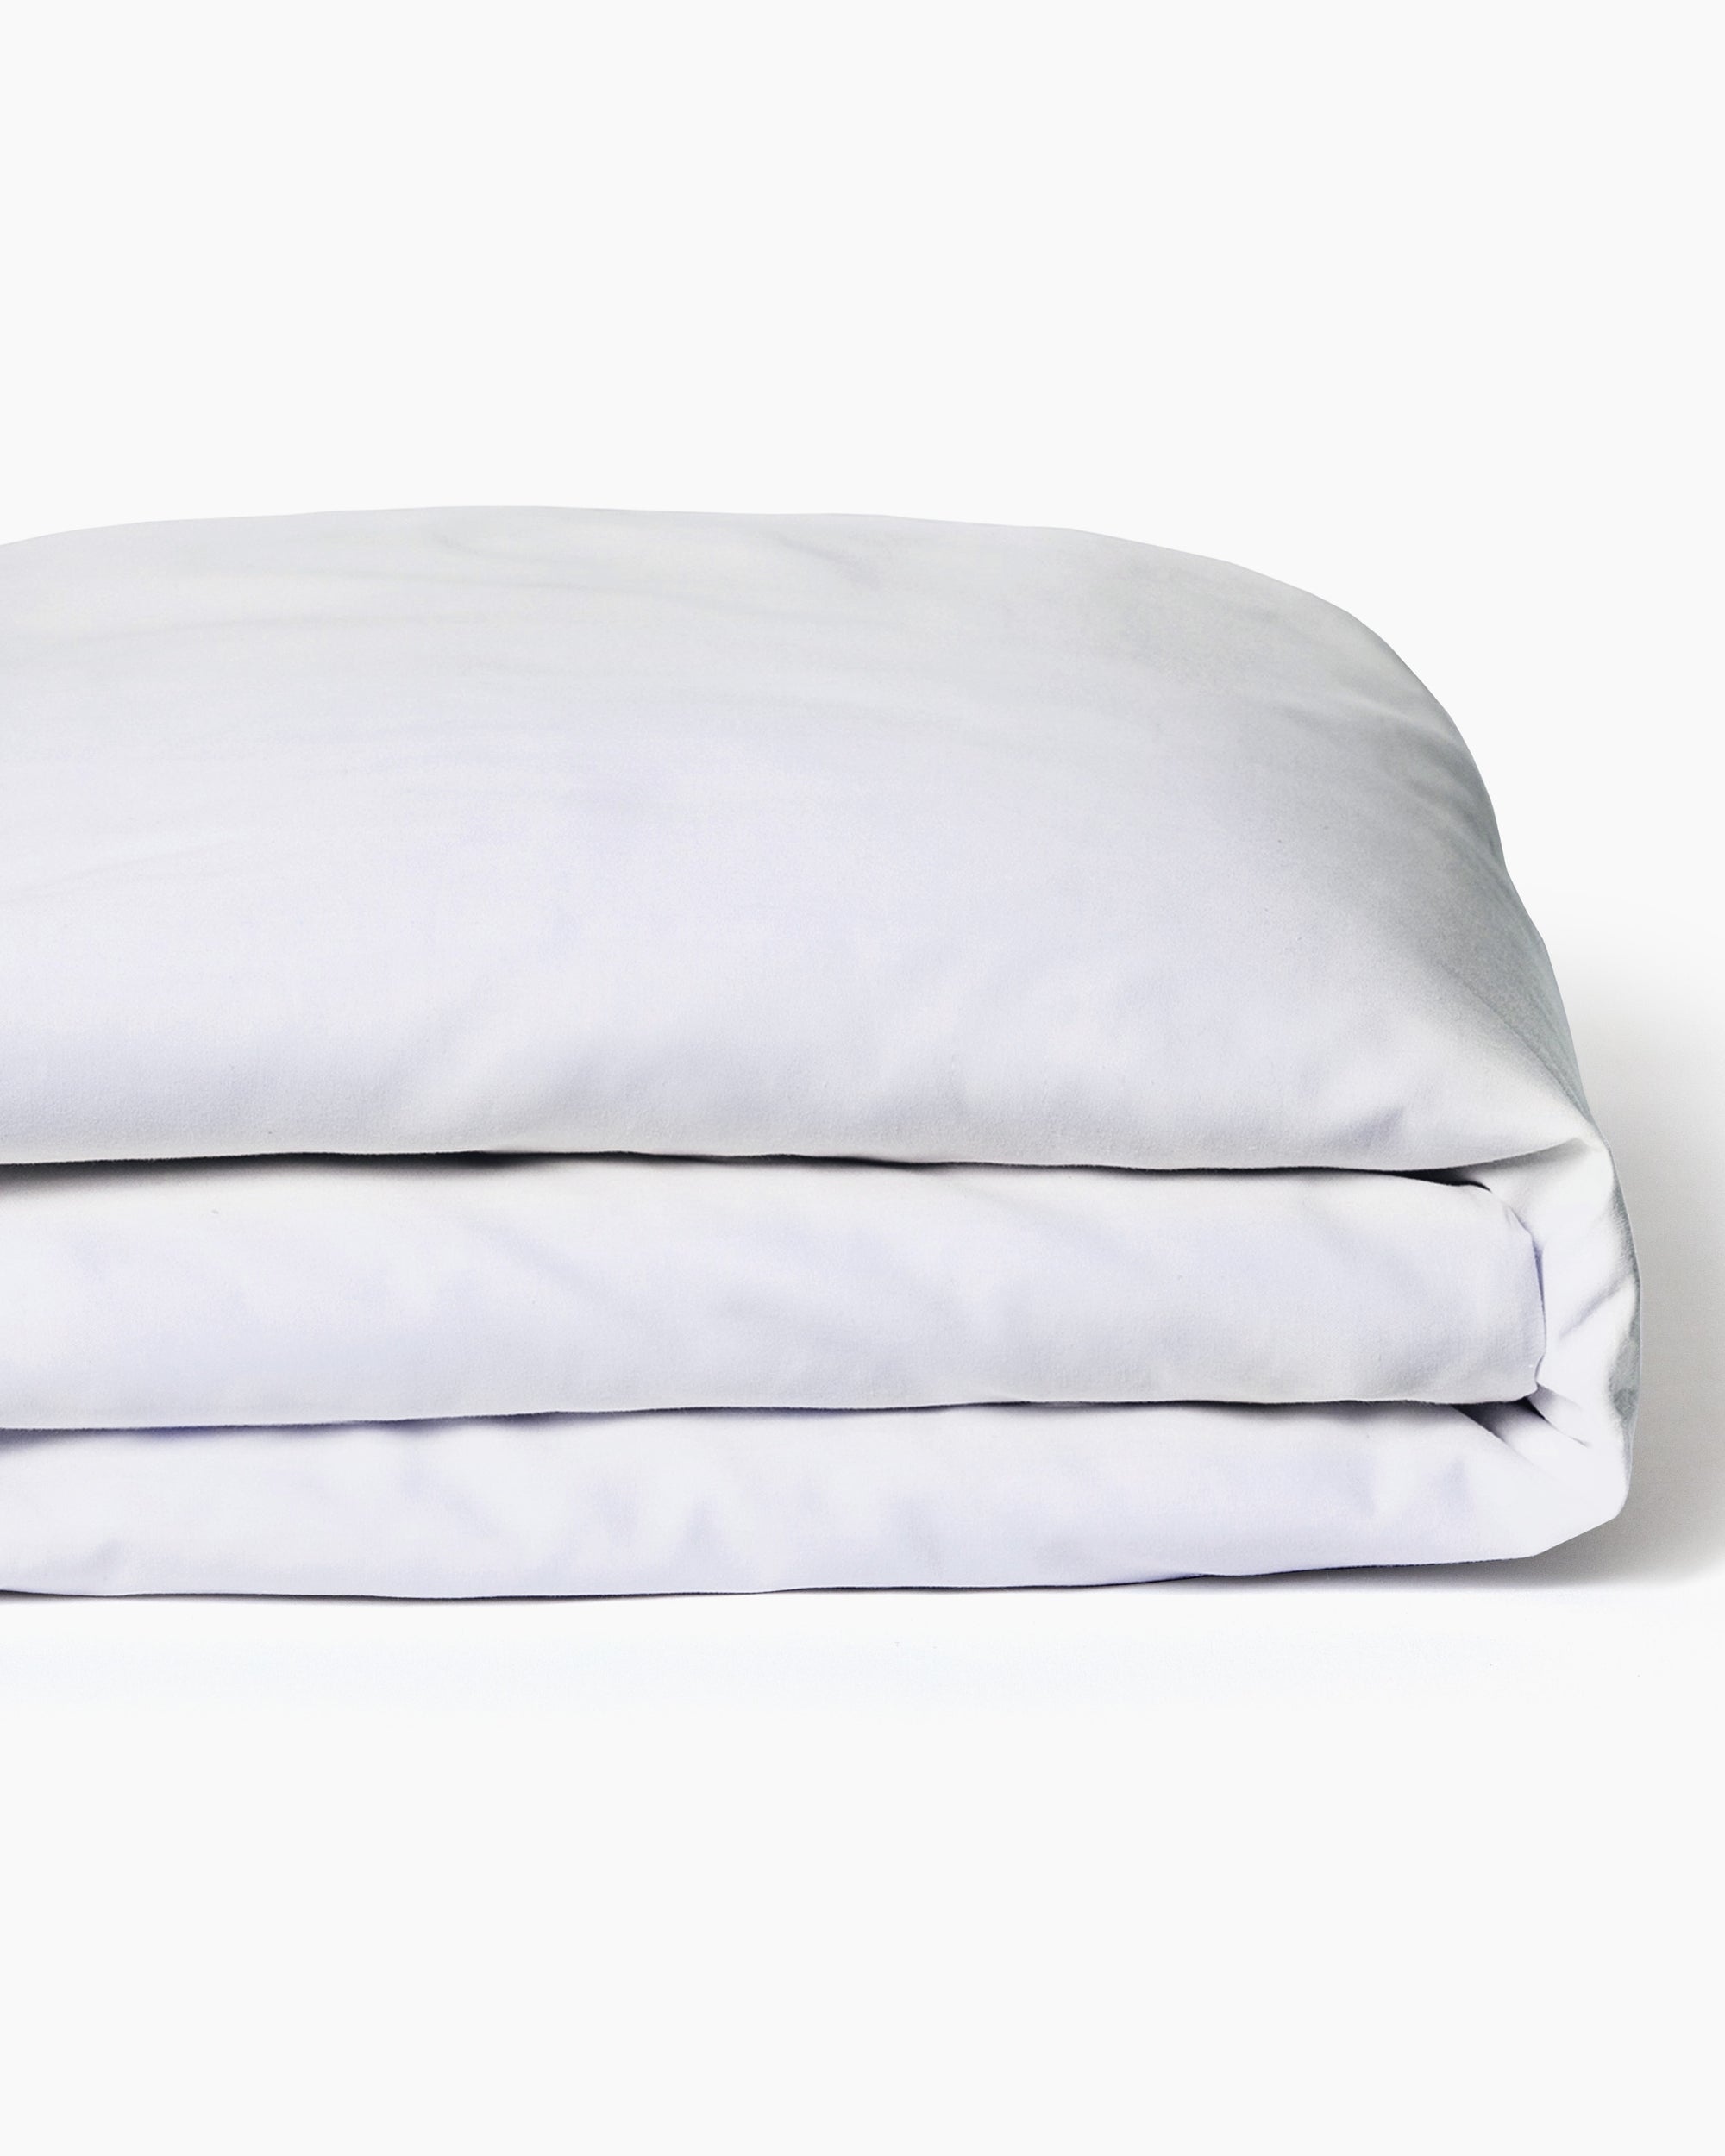 made in the usa cotton duvet cover signature white